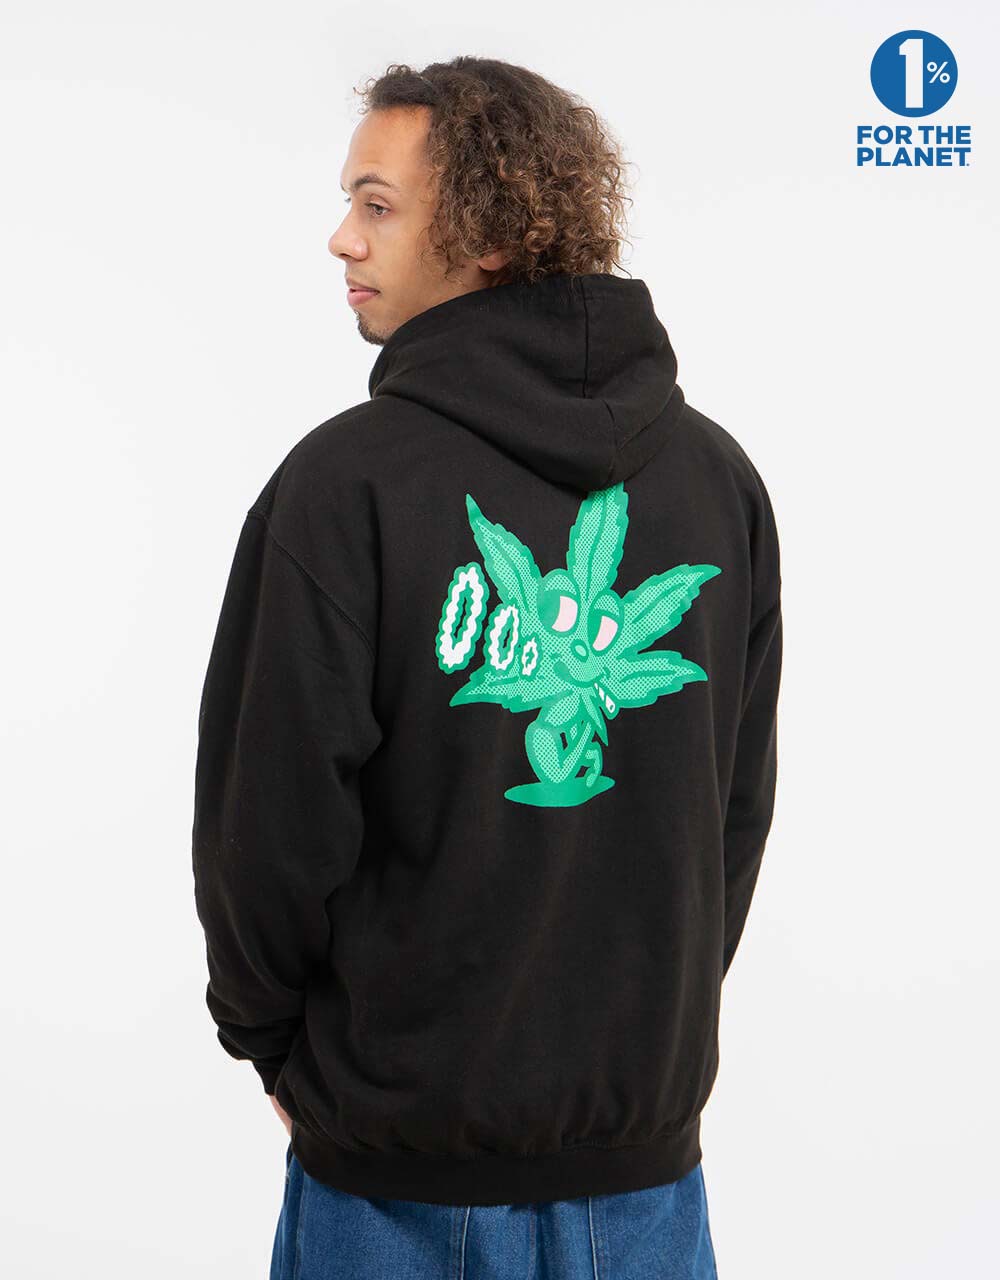 Route One High Hopes Pullover Hoodie - Black